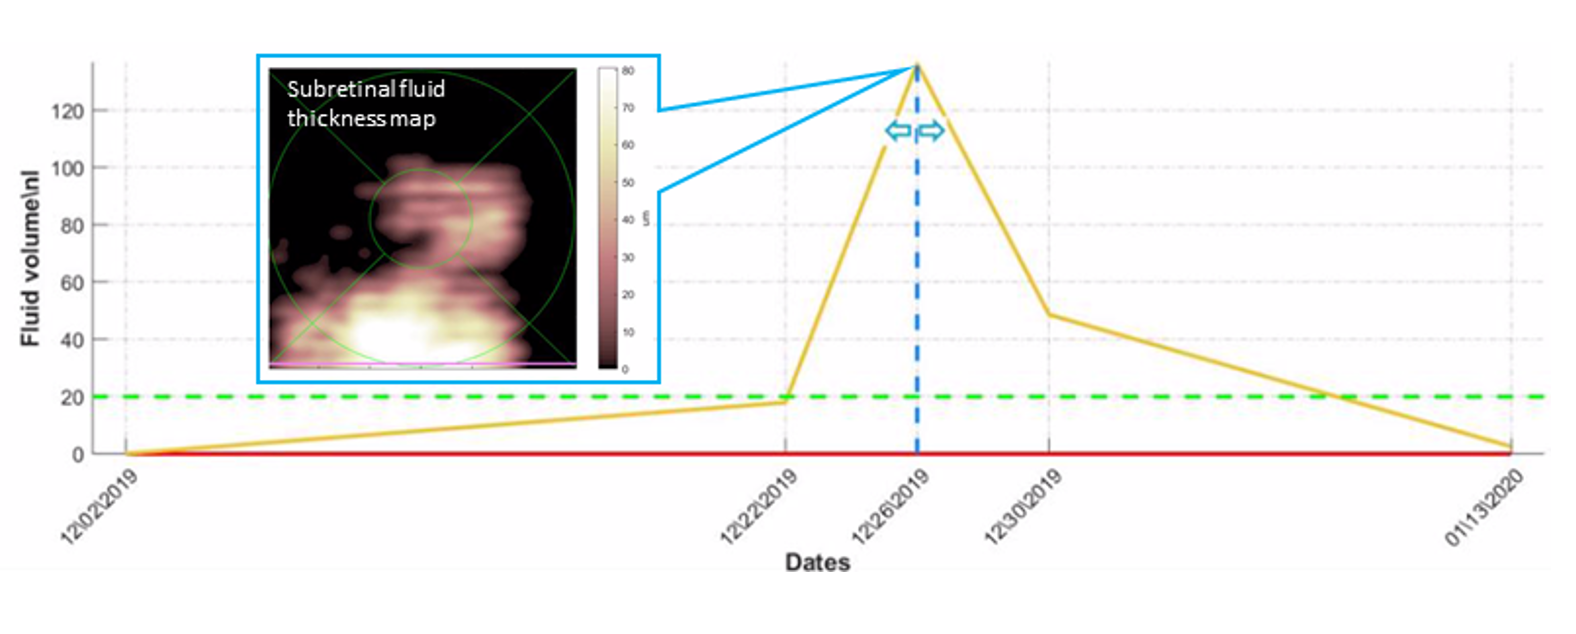 Figure 2: AI-based fluid quantification, mapping and tracking over time in a patient under anti-VEGF therapy (A. Loewenstein, Tel Aviv Medical Center, Tel Aviv, Israel)